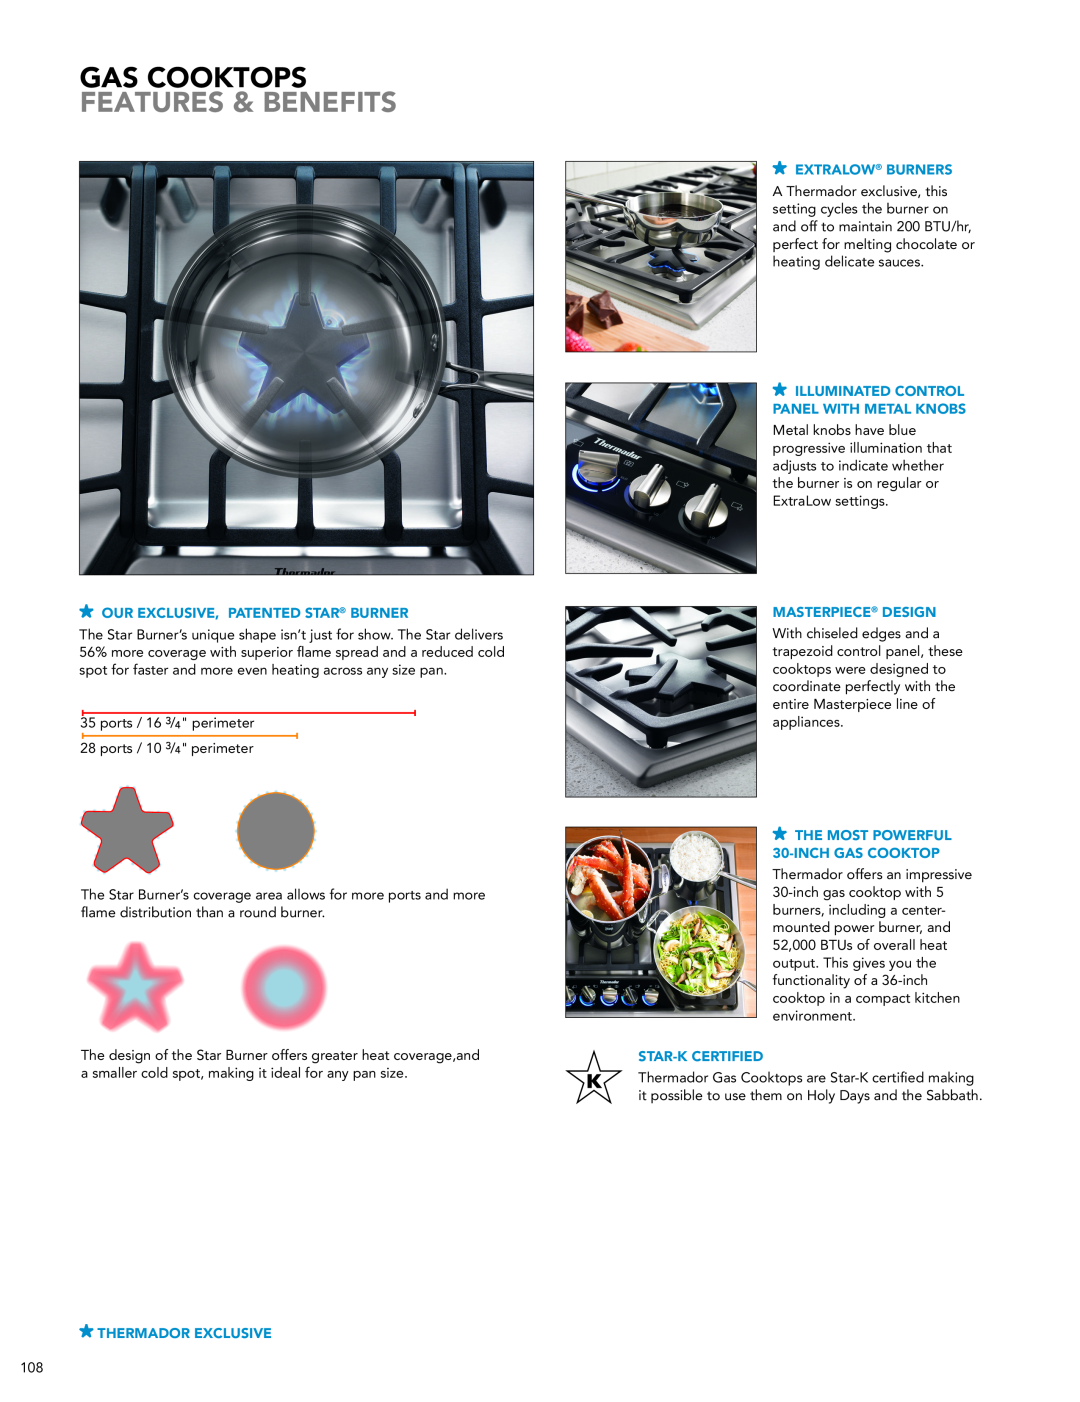 Thermador SGSX365FS, HDDW36FS Gas Cooktops, Features & Benefits, Our Exclusive, Patented Star Burner, Thermador Exclusive 